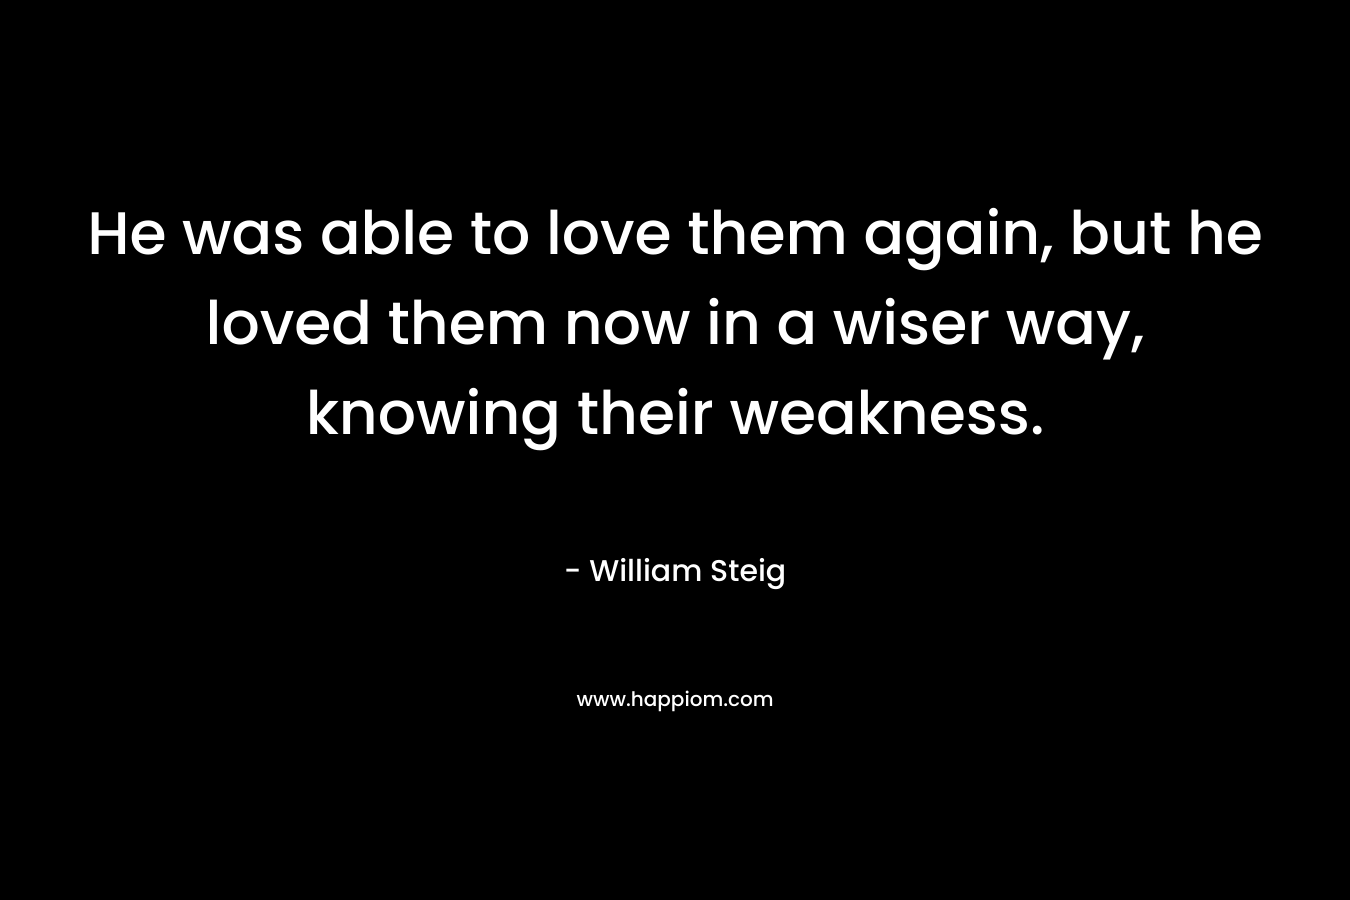 He was able to love them again, but he loved them now in a wiser way, knowing their weakness. – William Steig